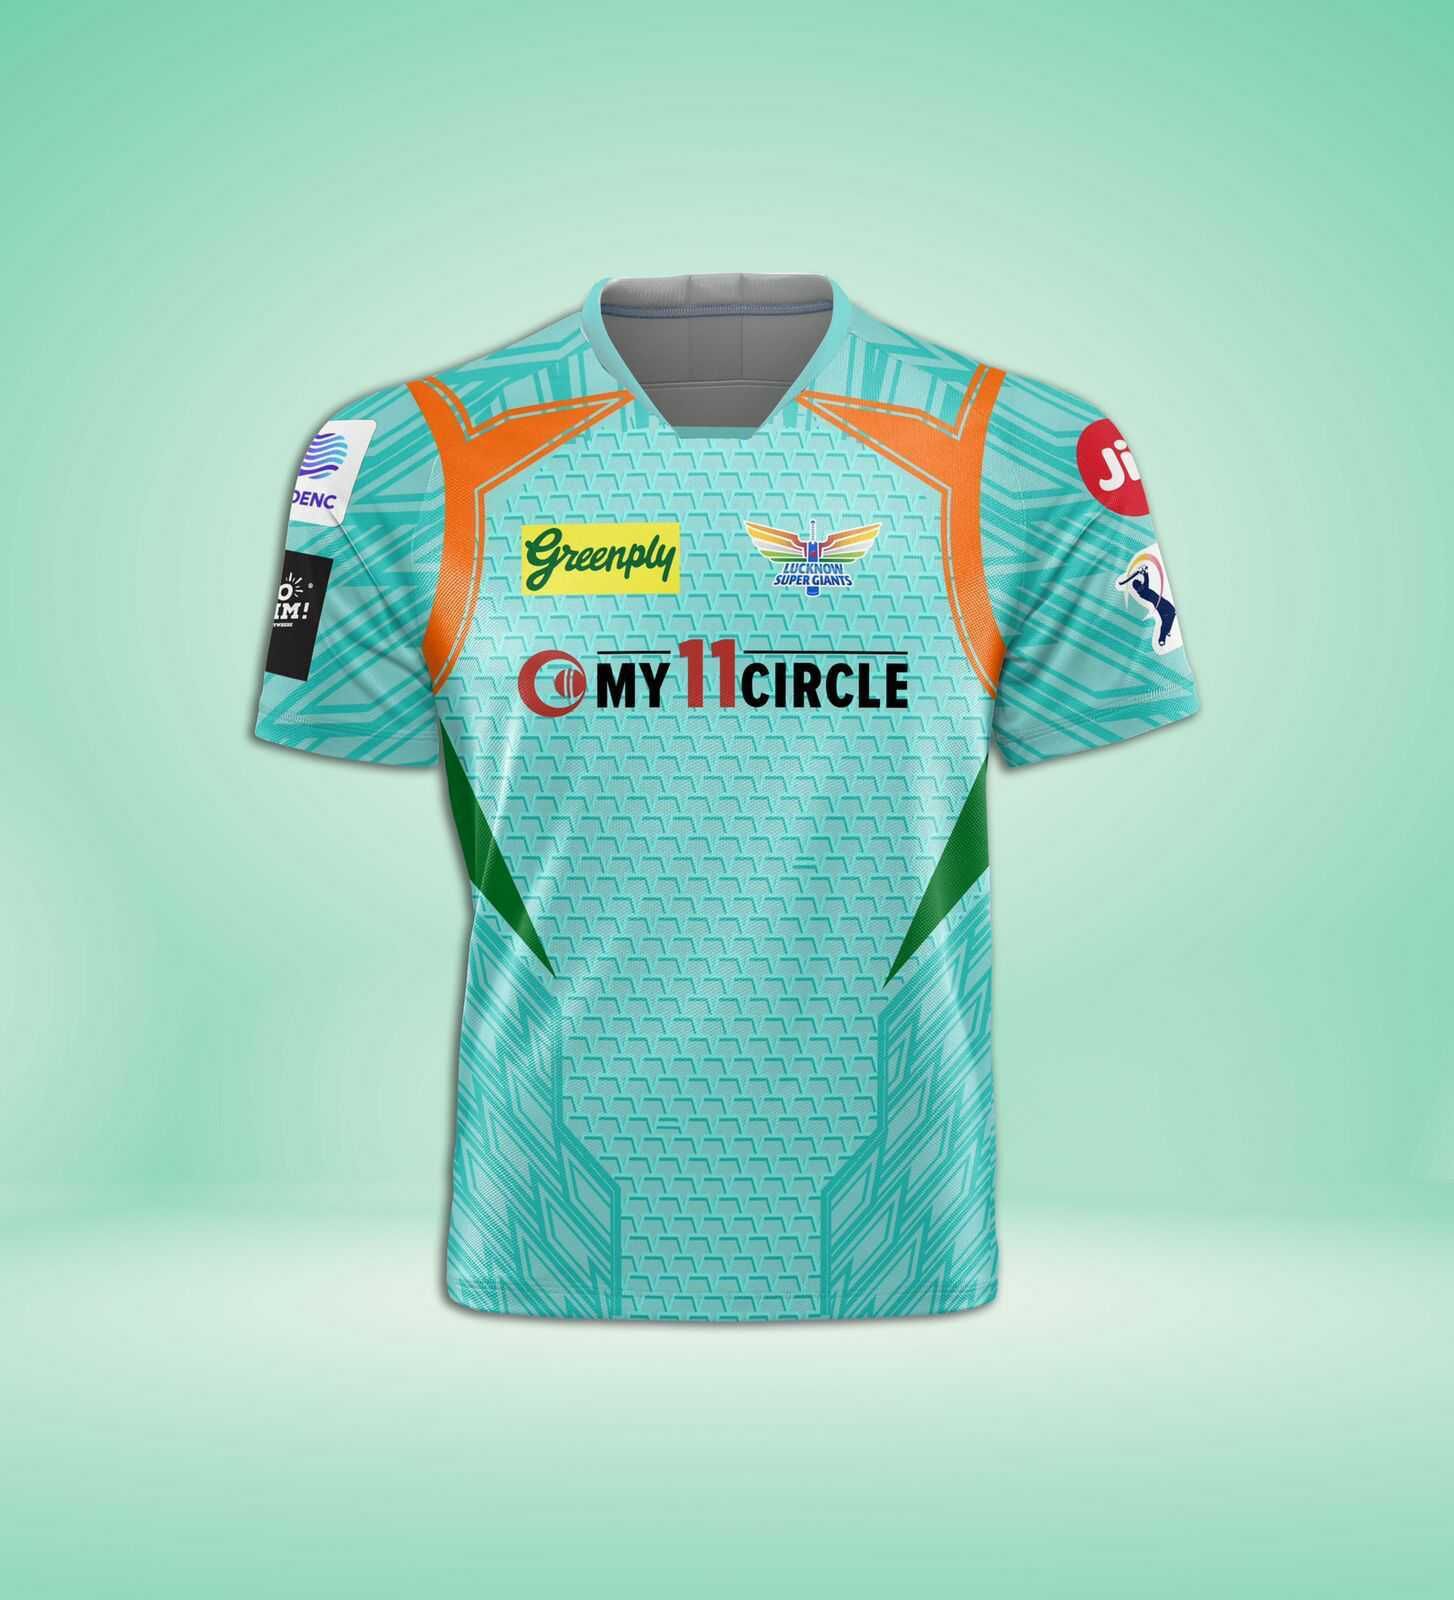 Lucknow Super Giants release jersey for IPL 2022: Watch